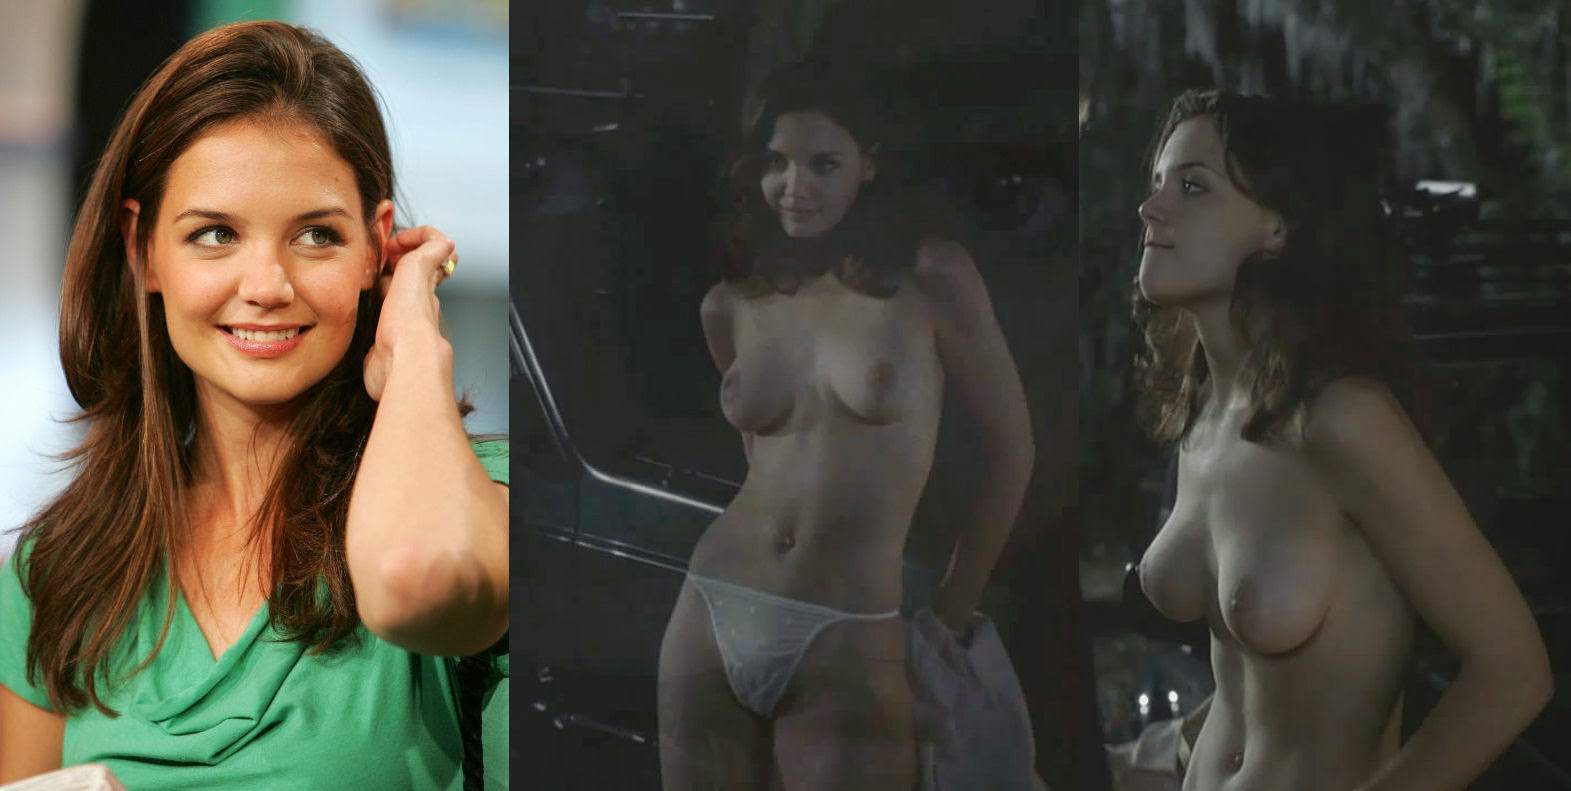 Hollywood actress undressing